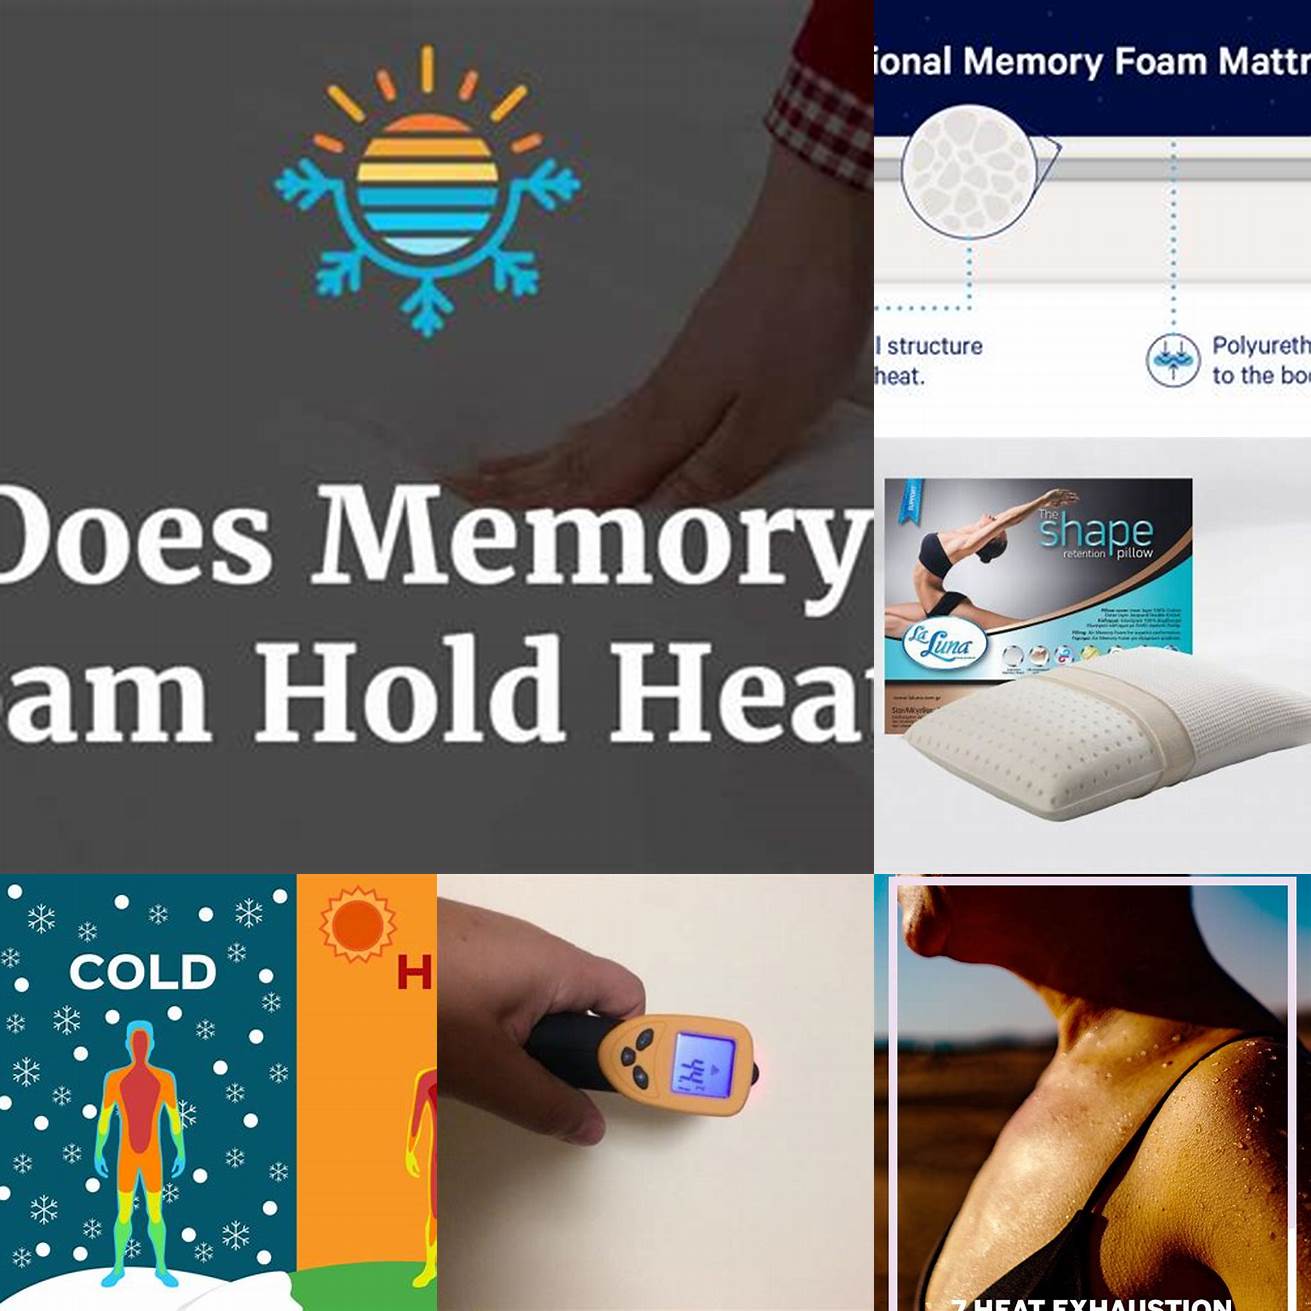 Heat retention Memory foam can trap body heat making you feel uncomfortably warm during the night